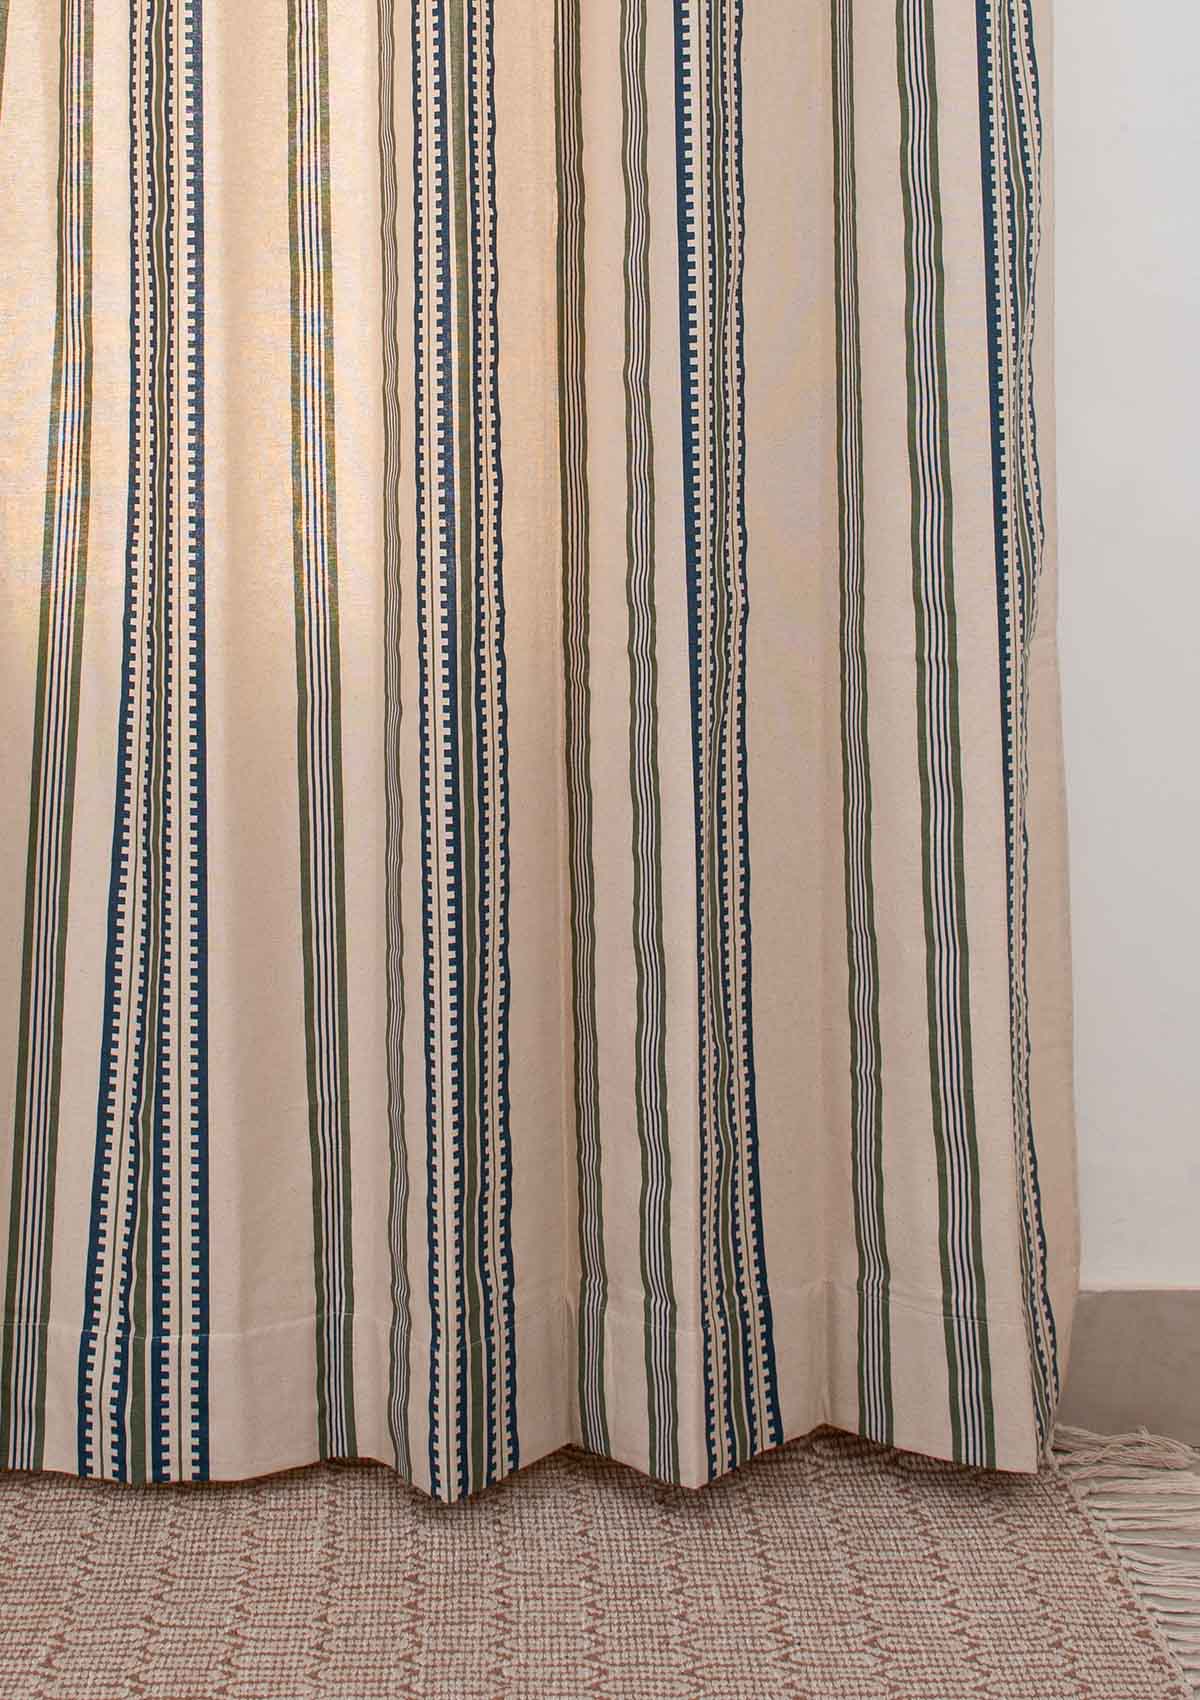 Roman Stripes 100% cotton geometric curtain for bed room - Room darkening - Pepper Green and Night Blue - Pack of 1